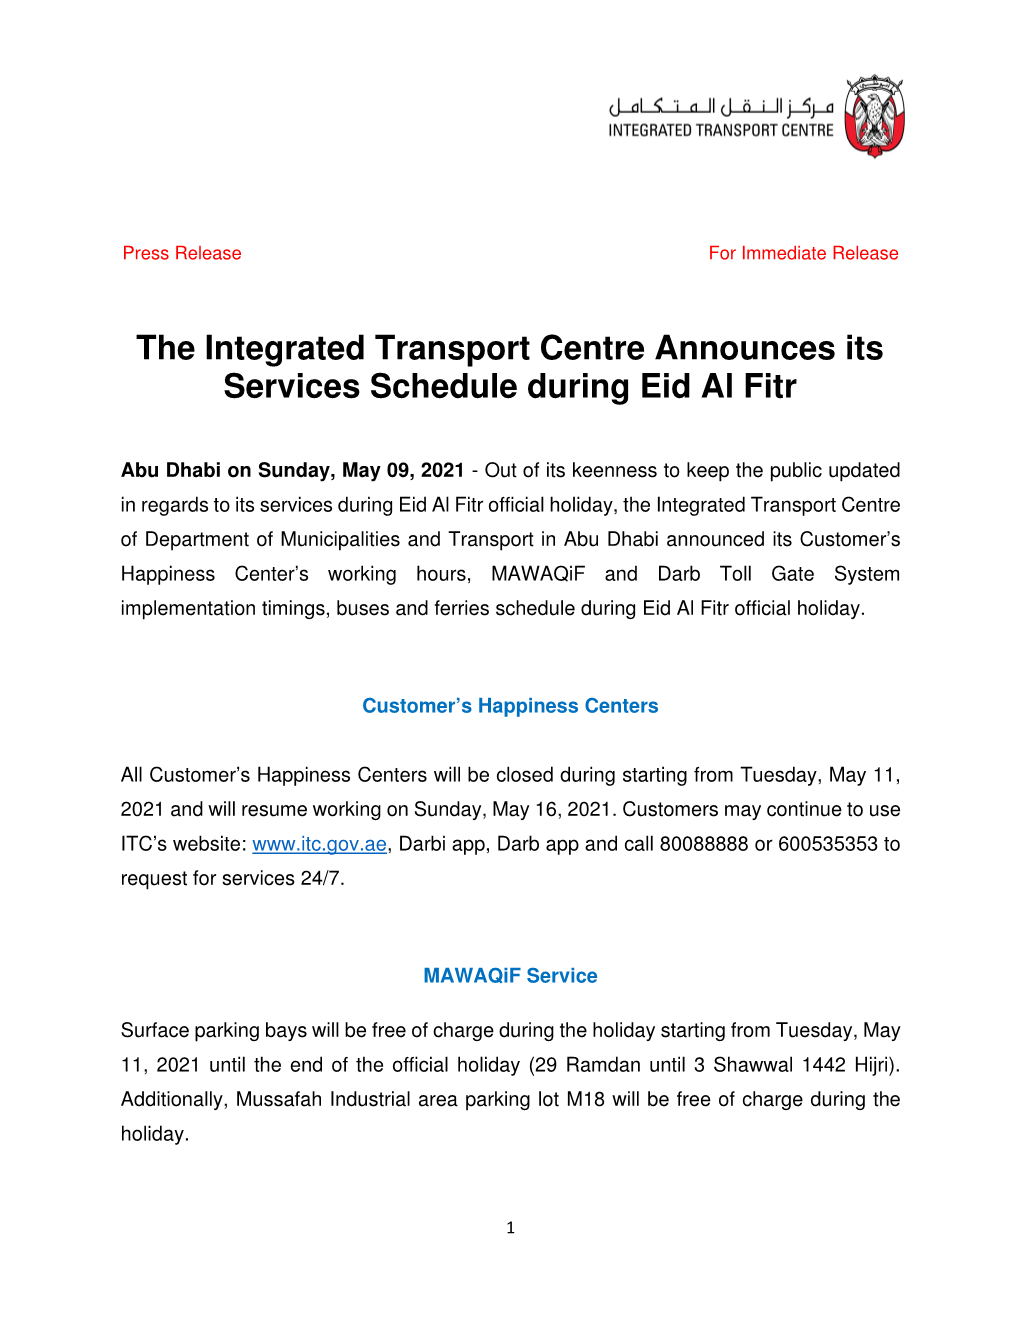 The Integrated Transport Centre Announces Its Services Schedule During Eid Al Fitr